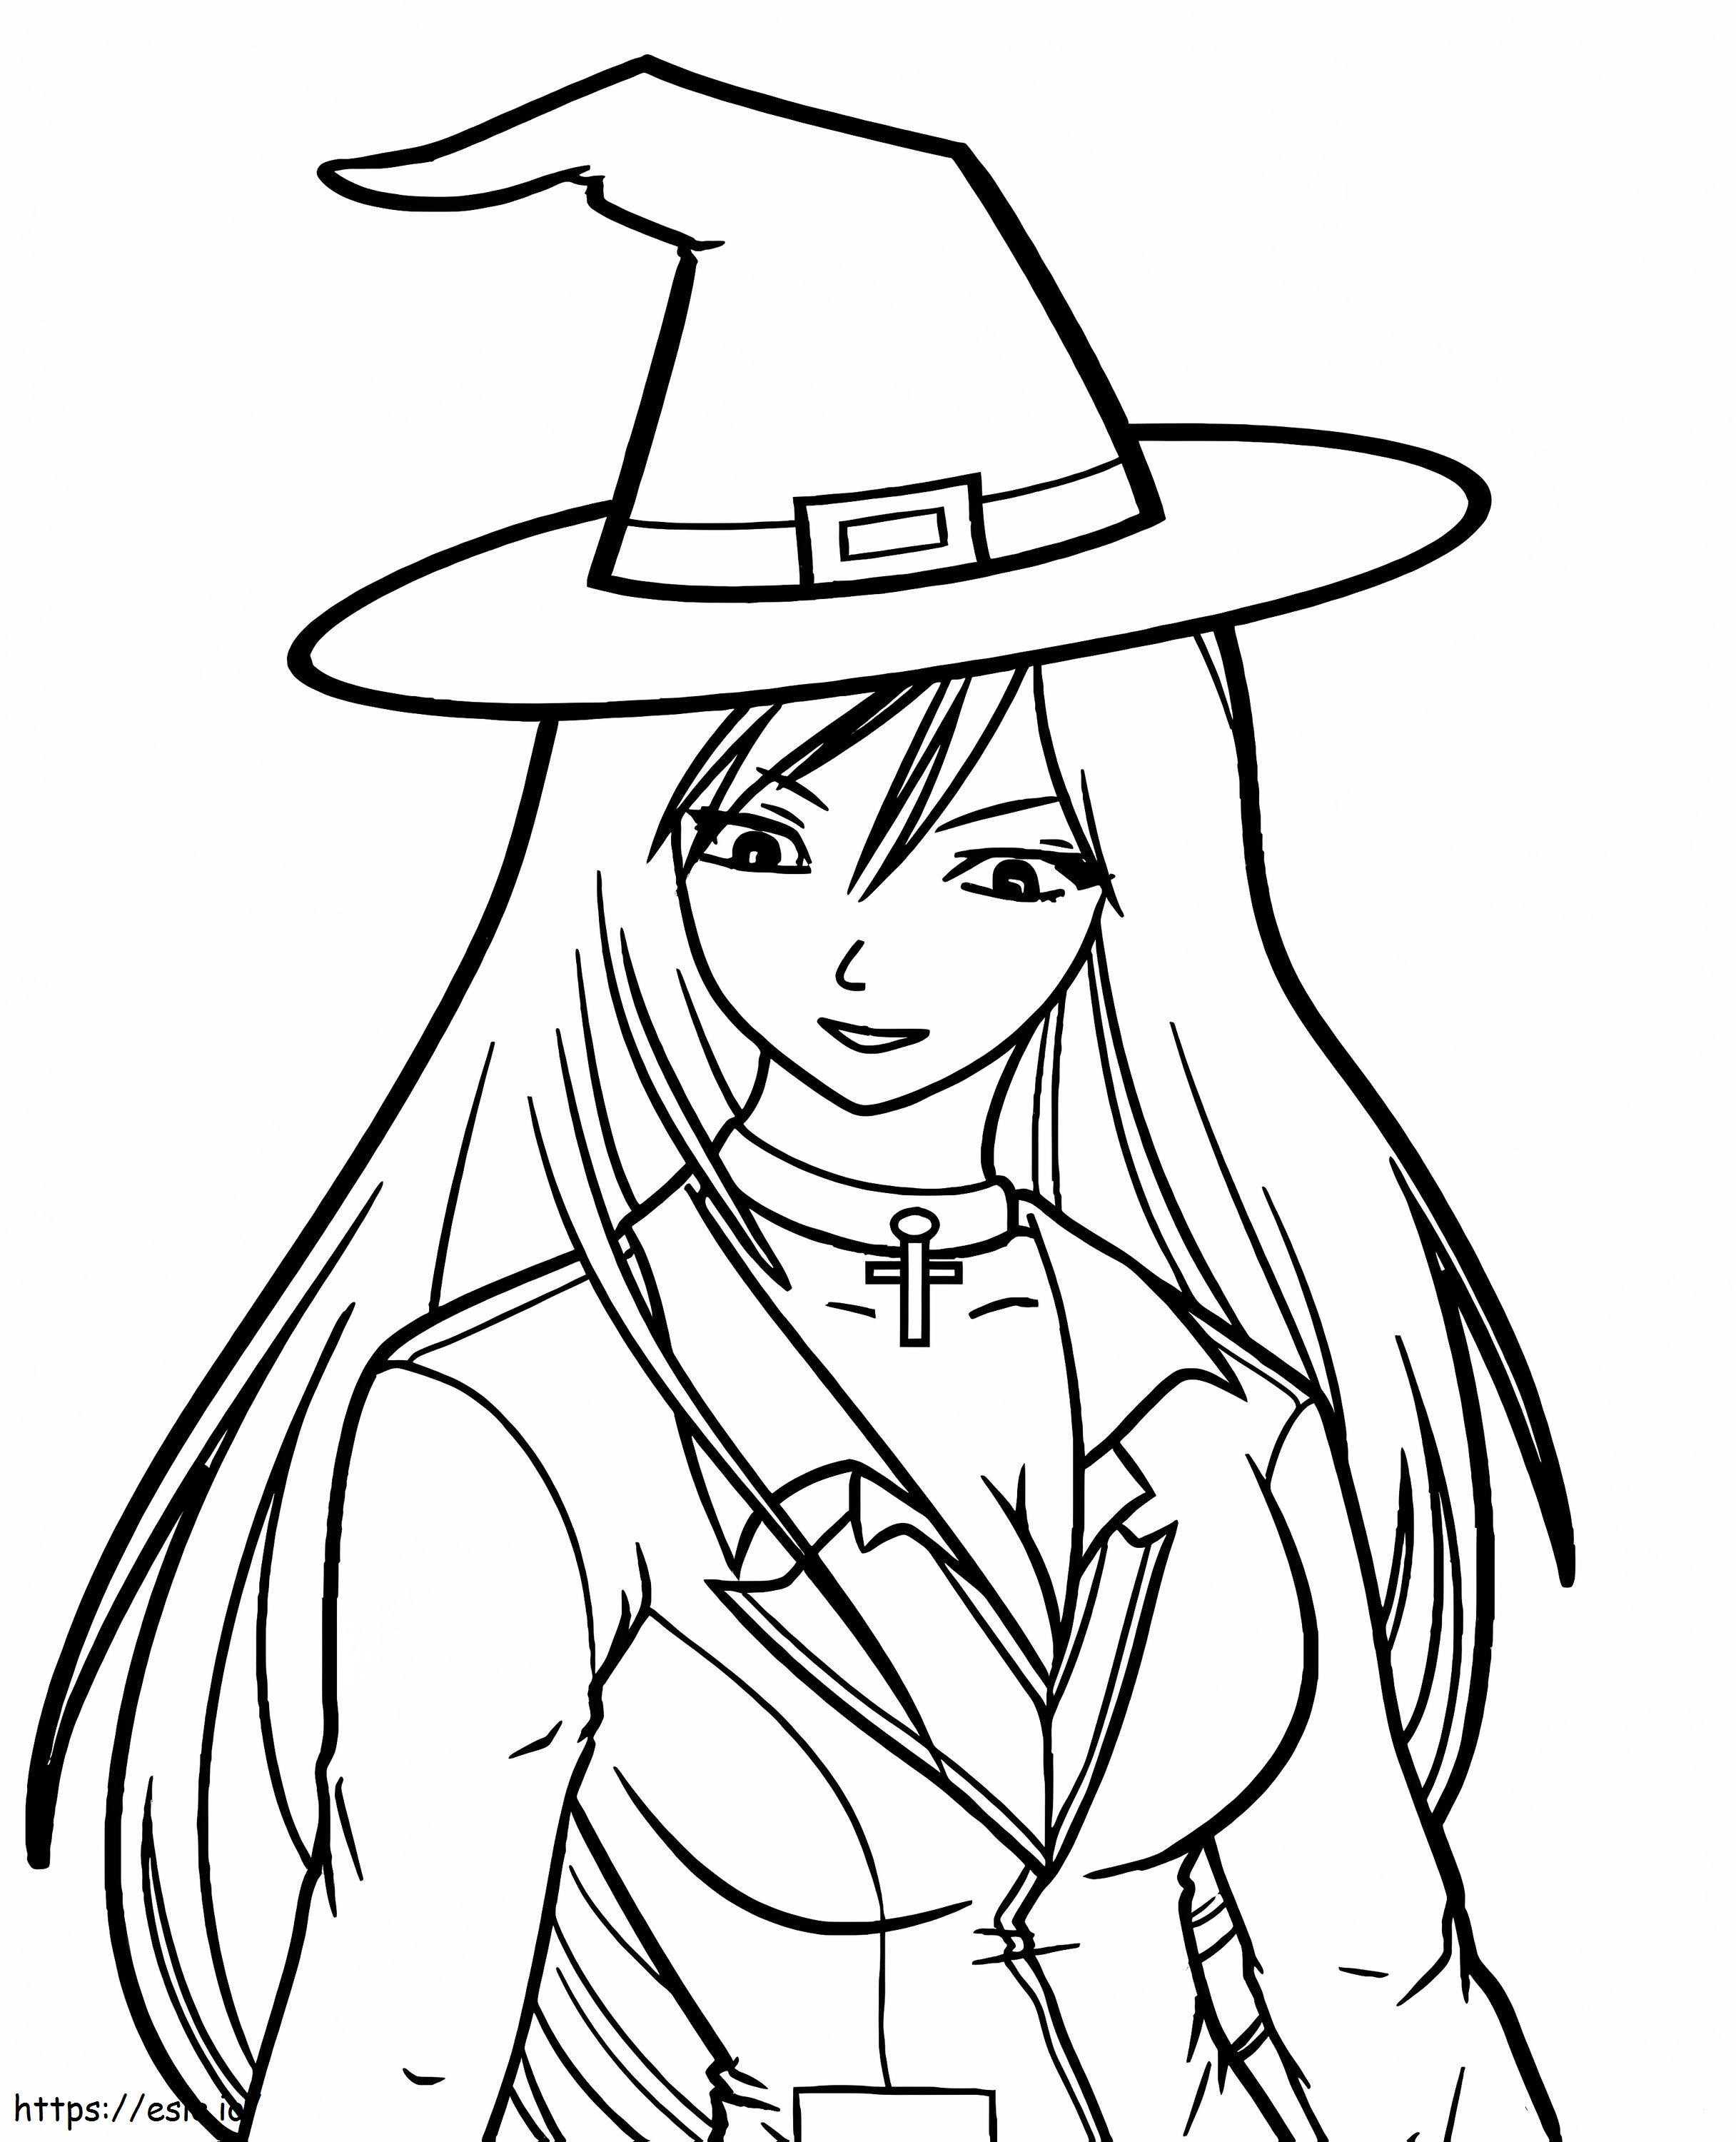 Smiling Girl Witch coloring page